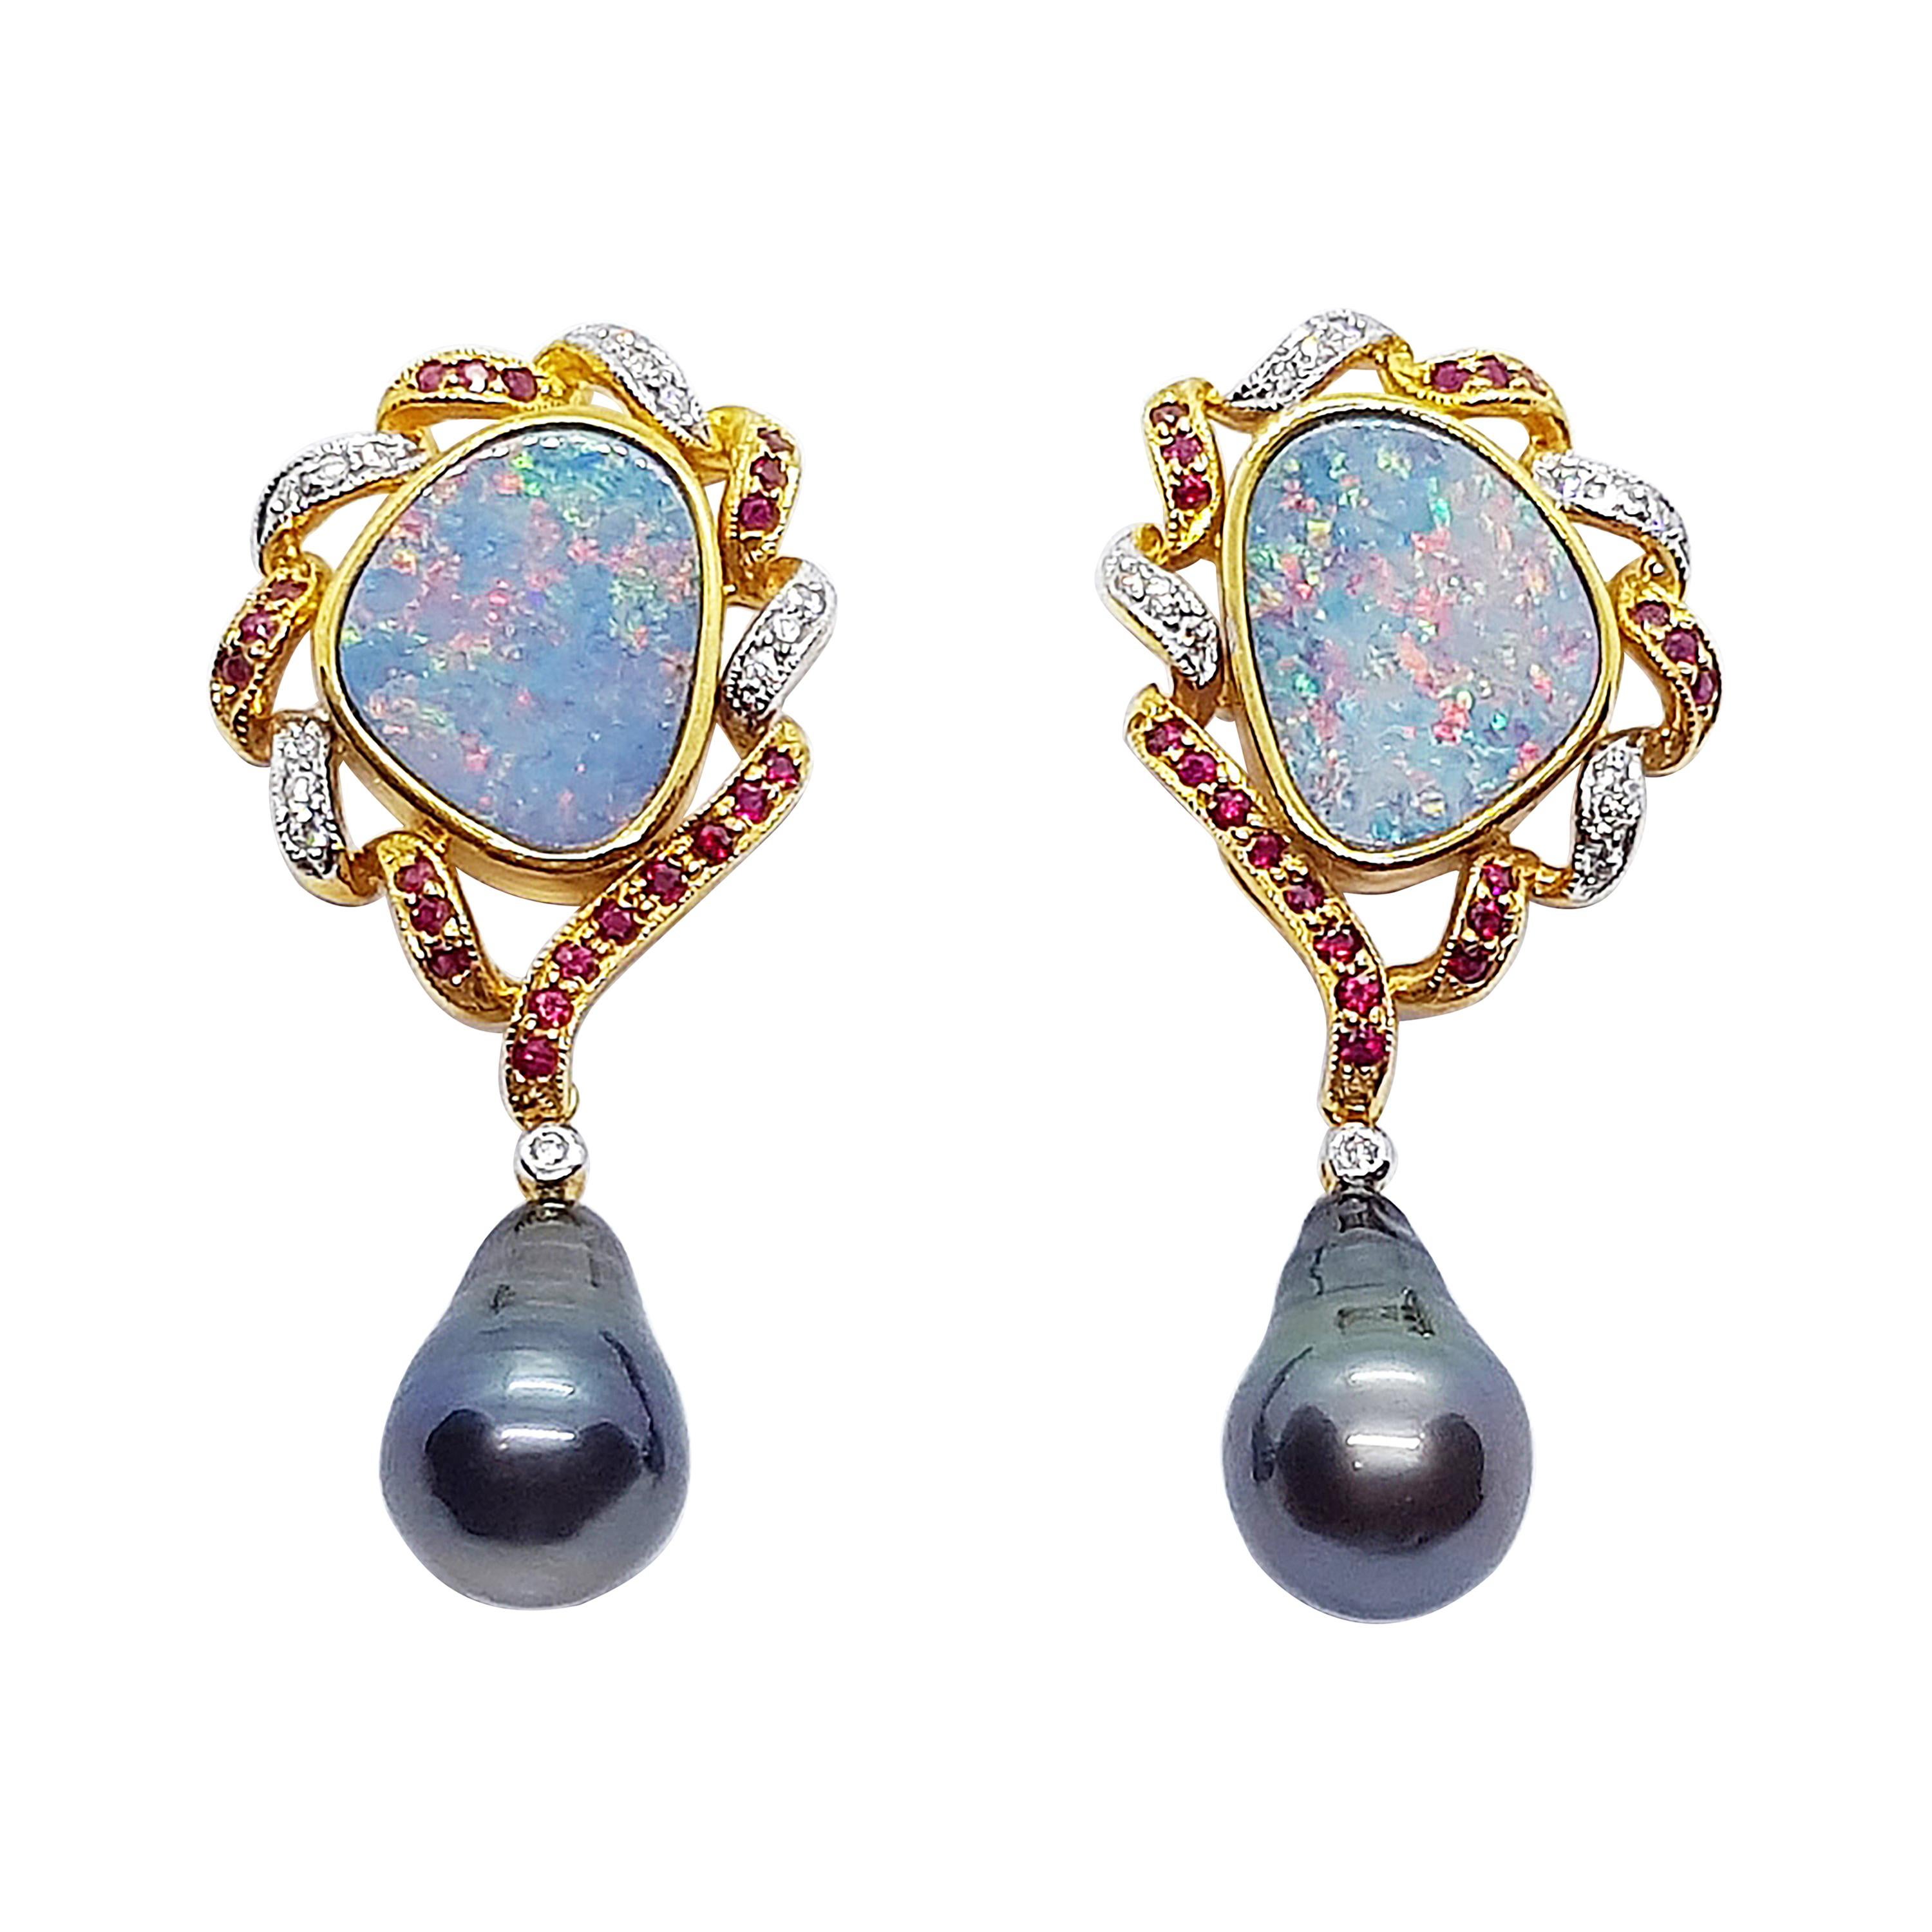 Boulder Opal with Ruby, Diamond and South Sea Pearl Earrings in 18 Karat Gold